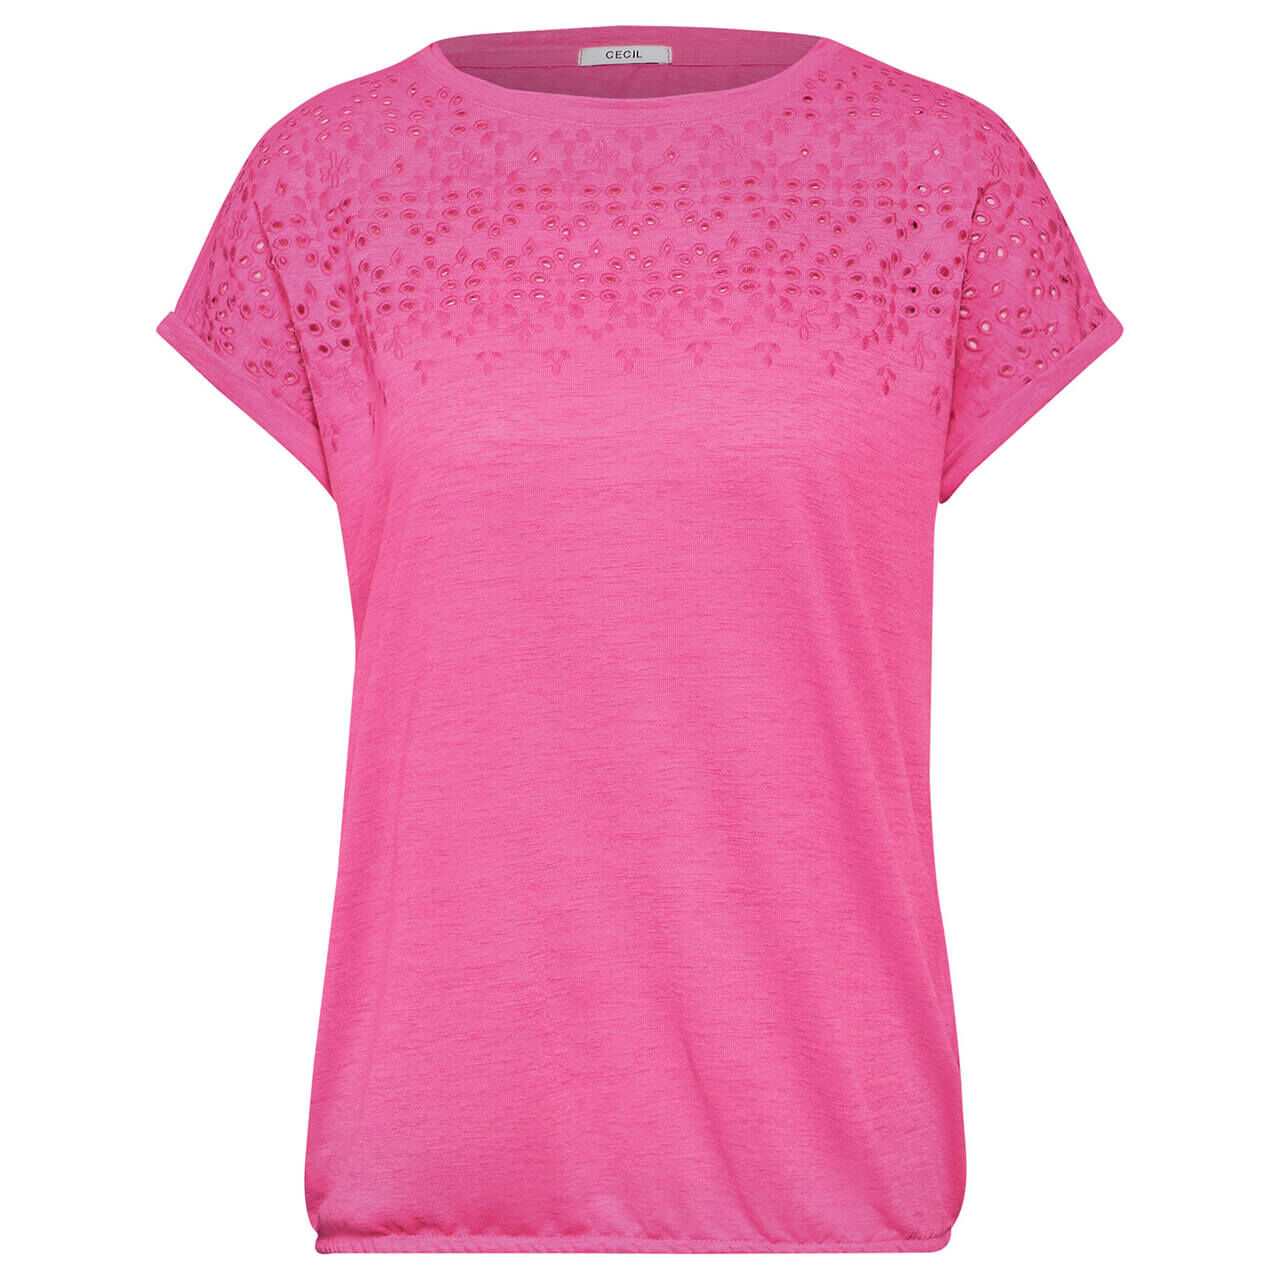 Cecil Damen T-Shirt Embroidery bloomy pink